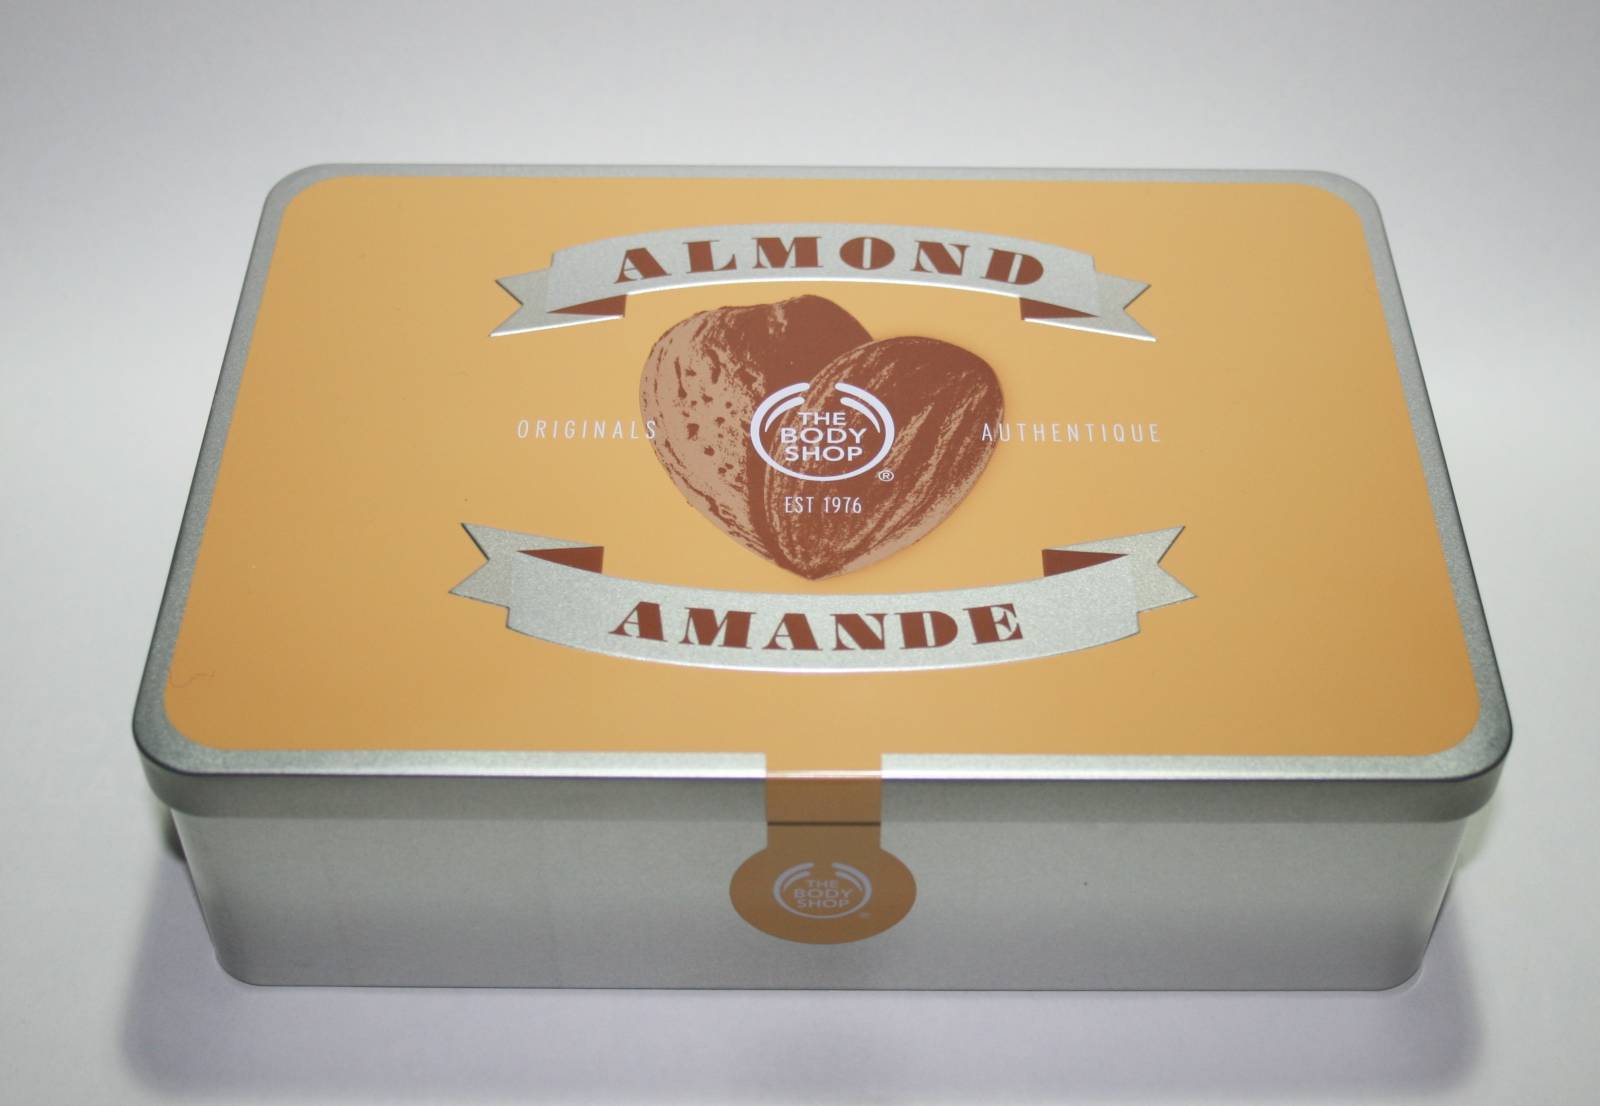 12 Gifts of Christmas: The Body Shop Almond Hand & Nail Expert Set